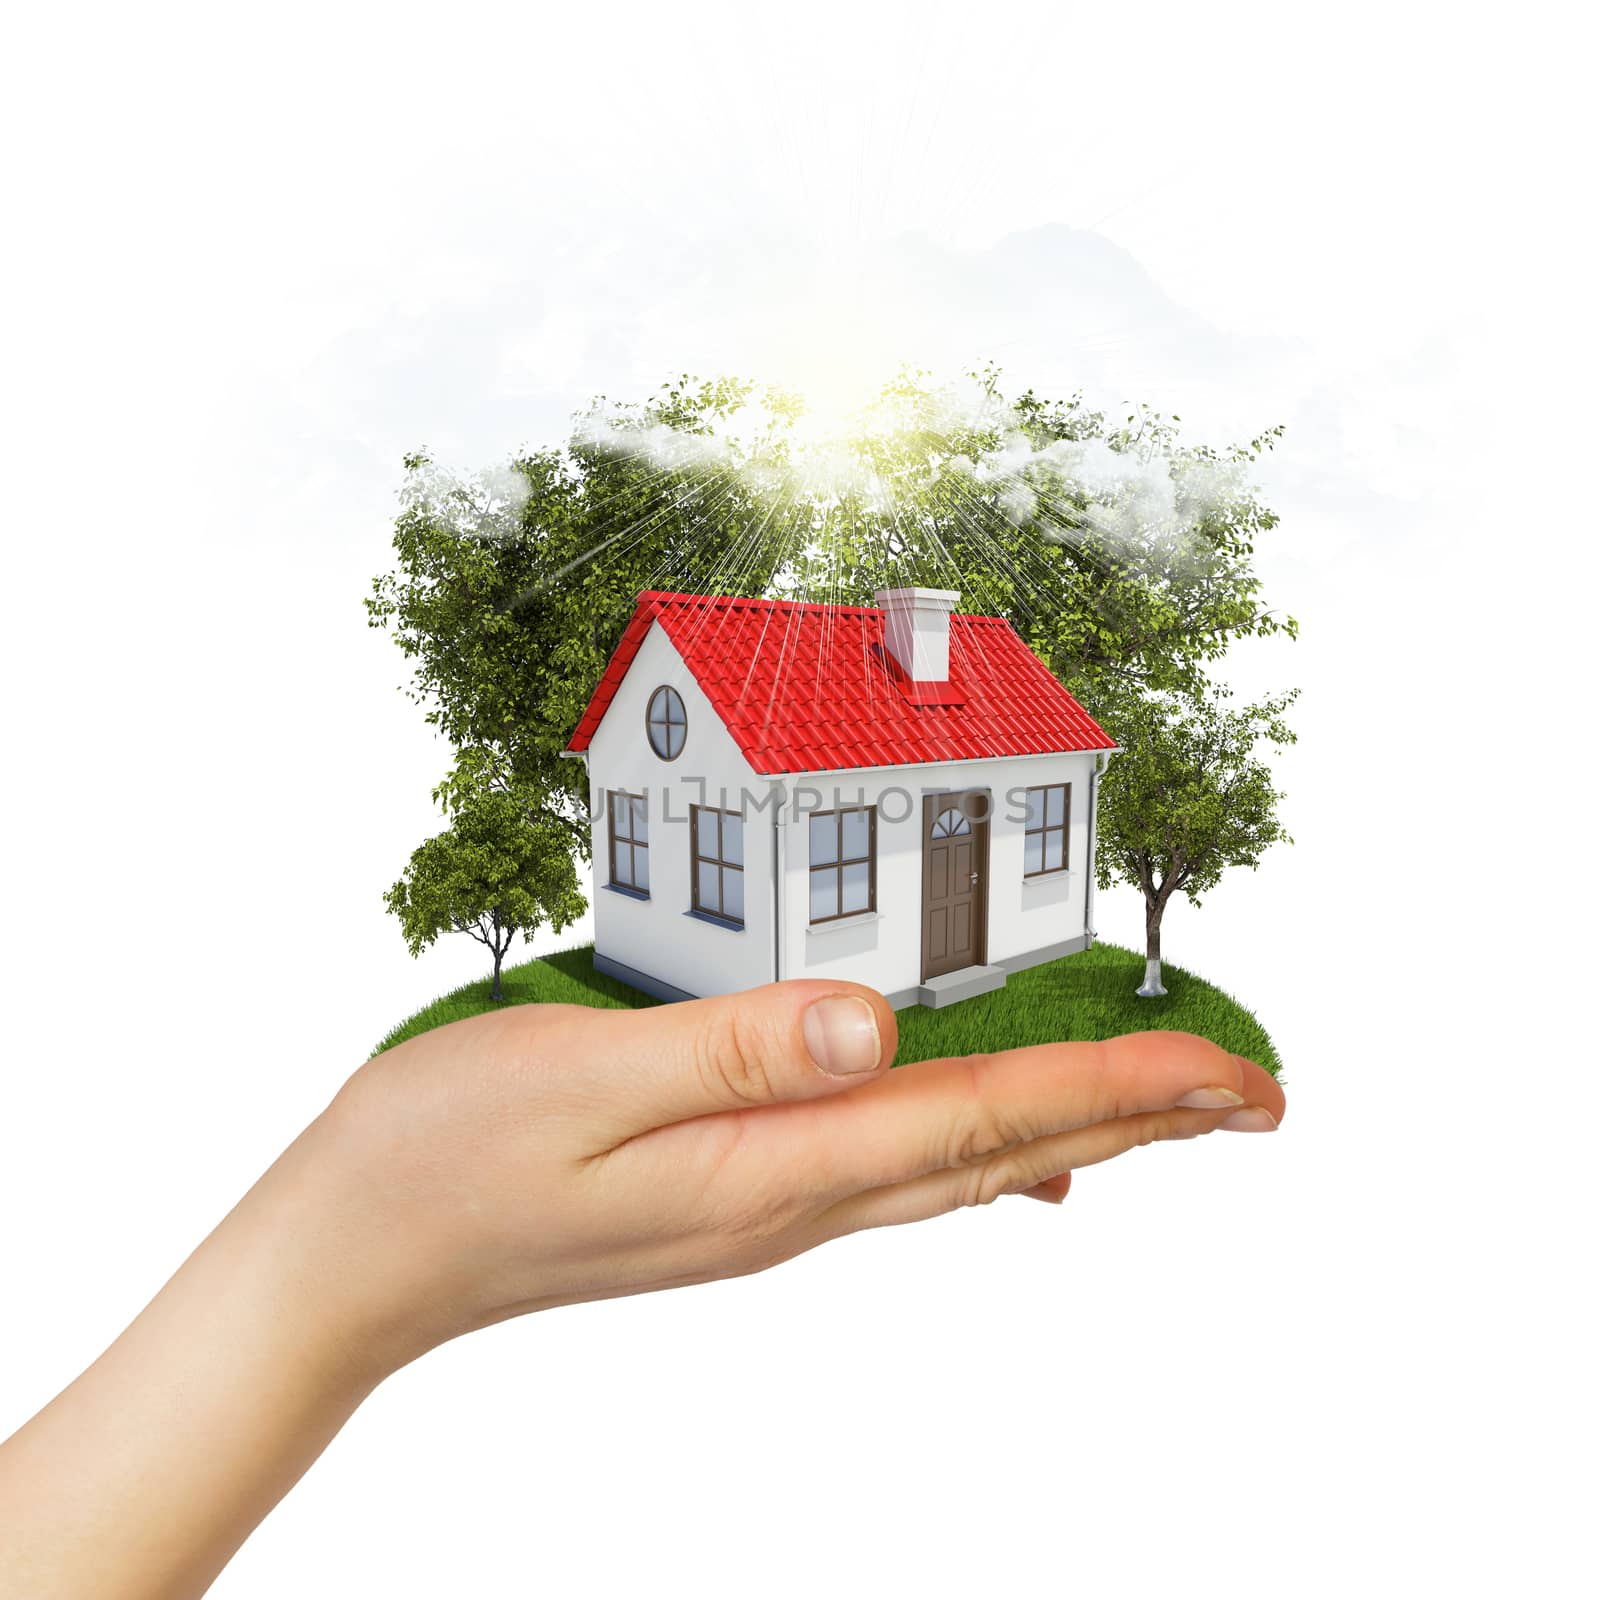 Human hand holding small house with trees and grass. Real estate concept